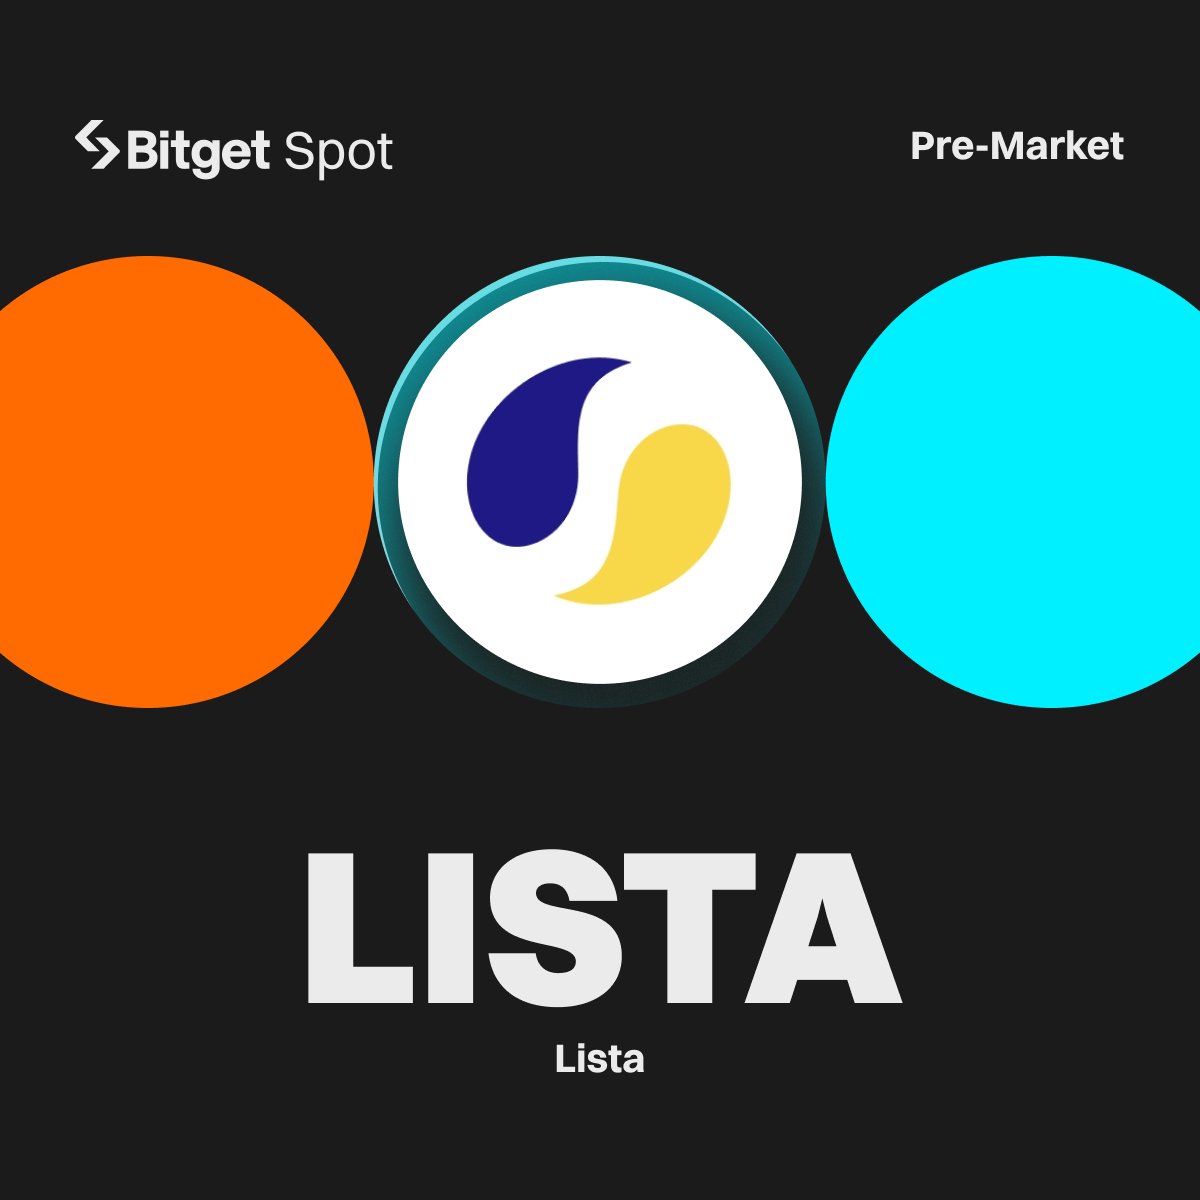 Pre-Market Listing: $LISTA @lista_dao #Bitget will launch $LISTA pre-market trading on ⏰ May 23, 9 AM (UTC). Trade $LISTA before it becomes available for spot trading! More details: bitget.com/support/articl…